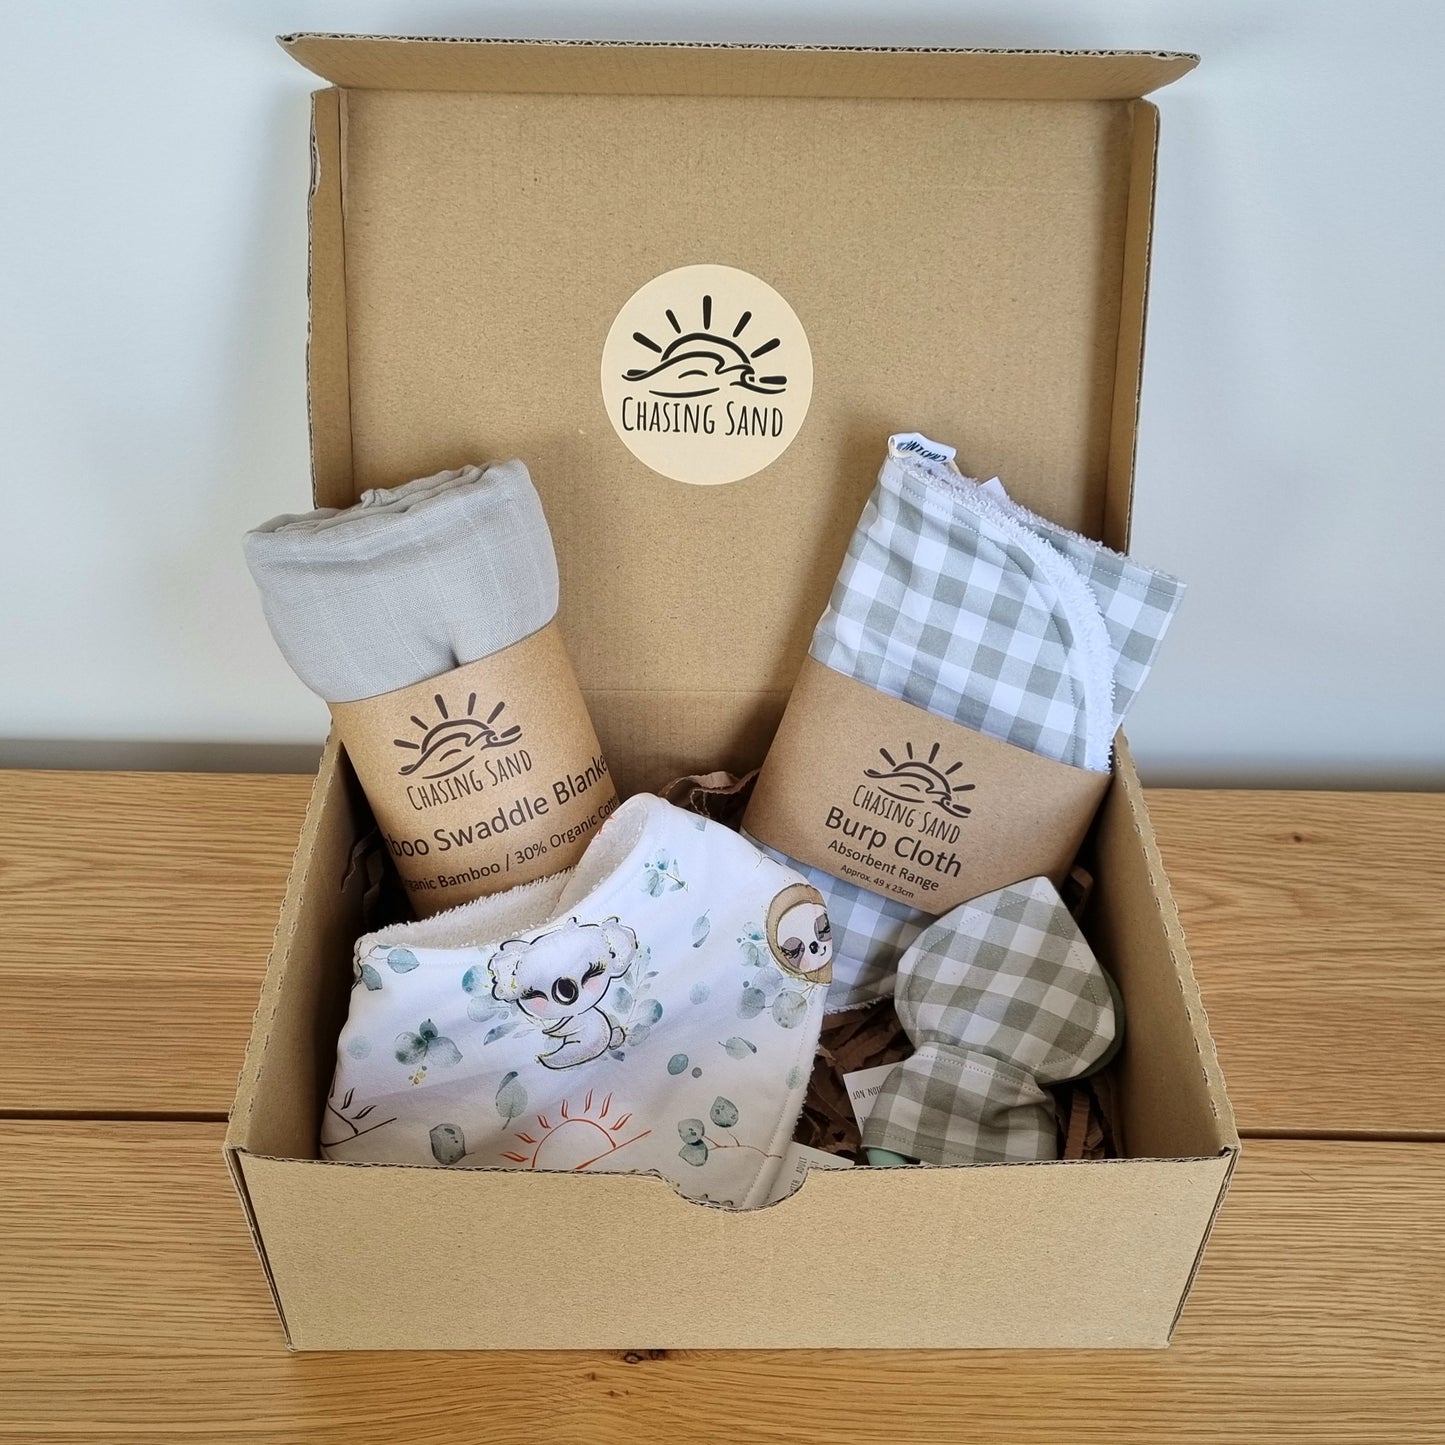 For Baby Swaddle Gift Box - Create your own